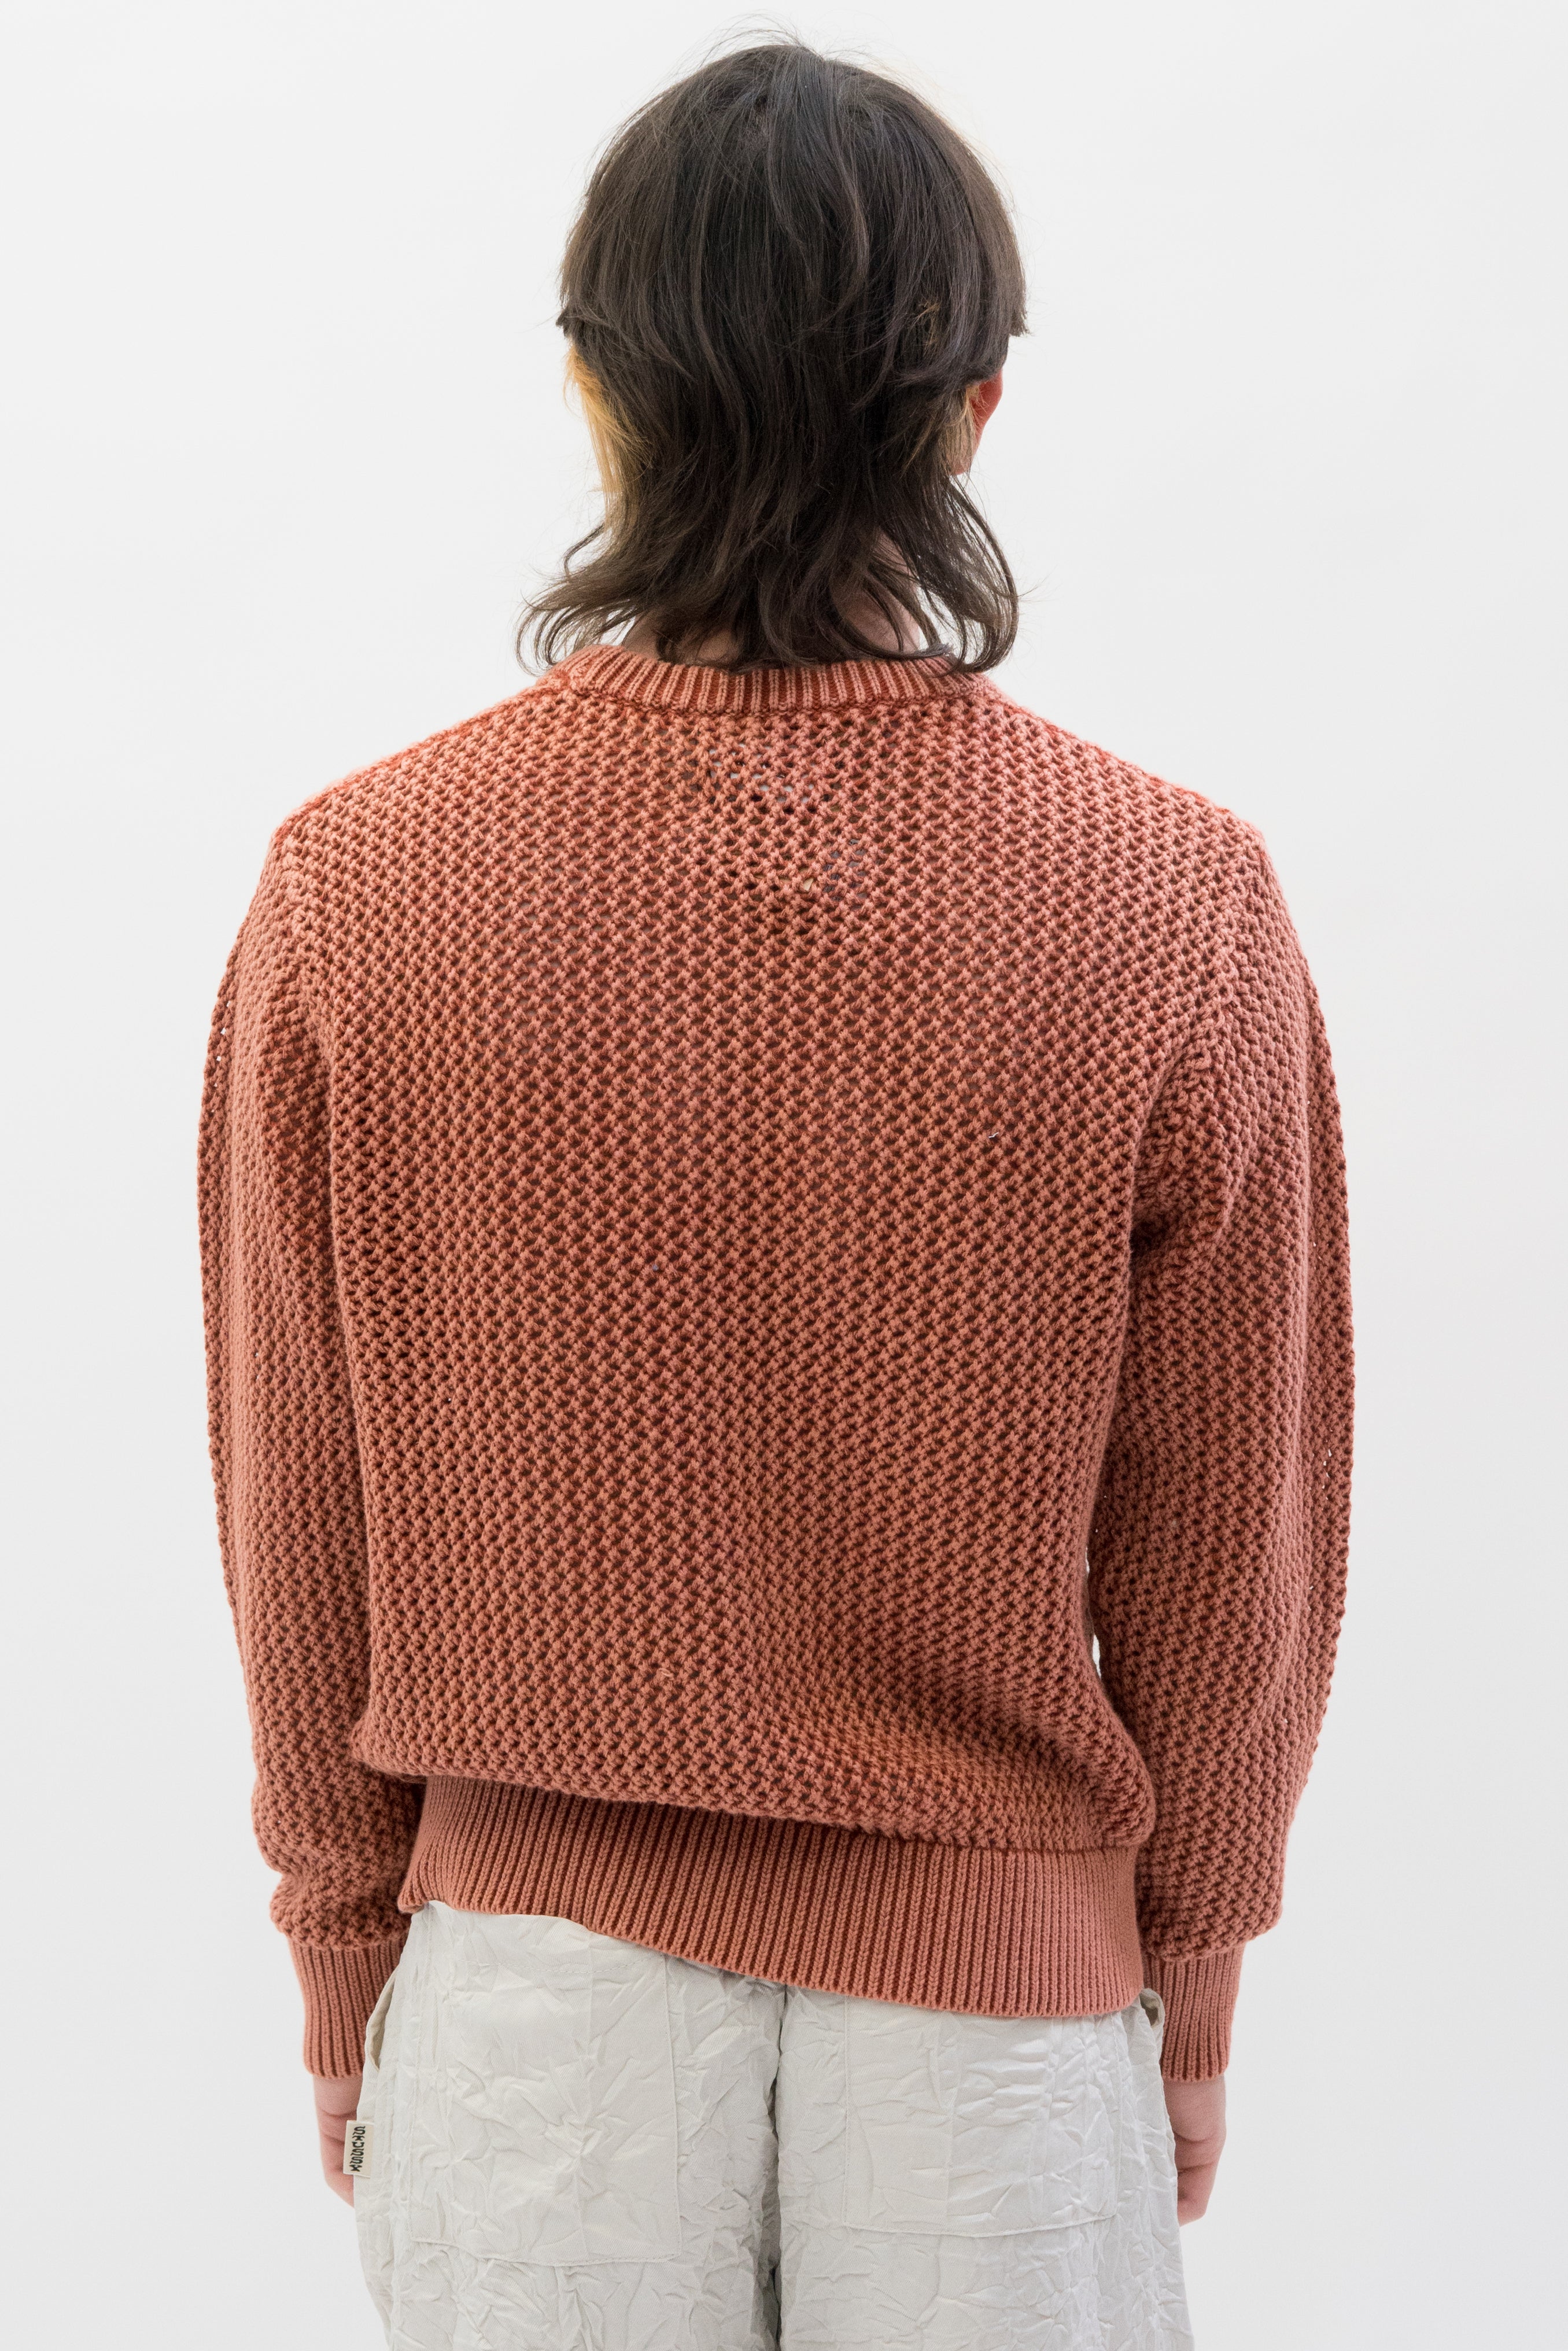 Stussy Pigment Dyed Loose Gauge Sweater in Salmon